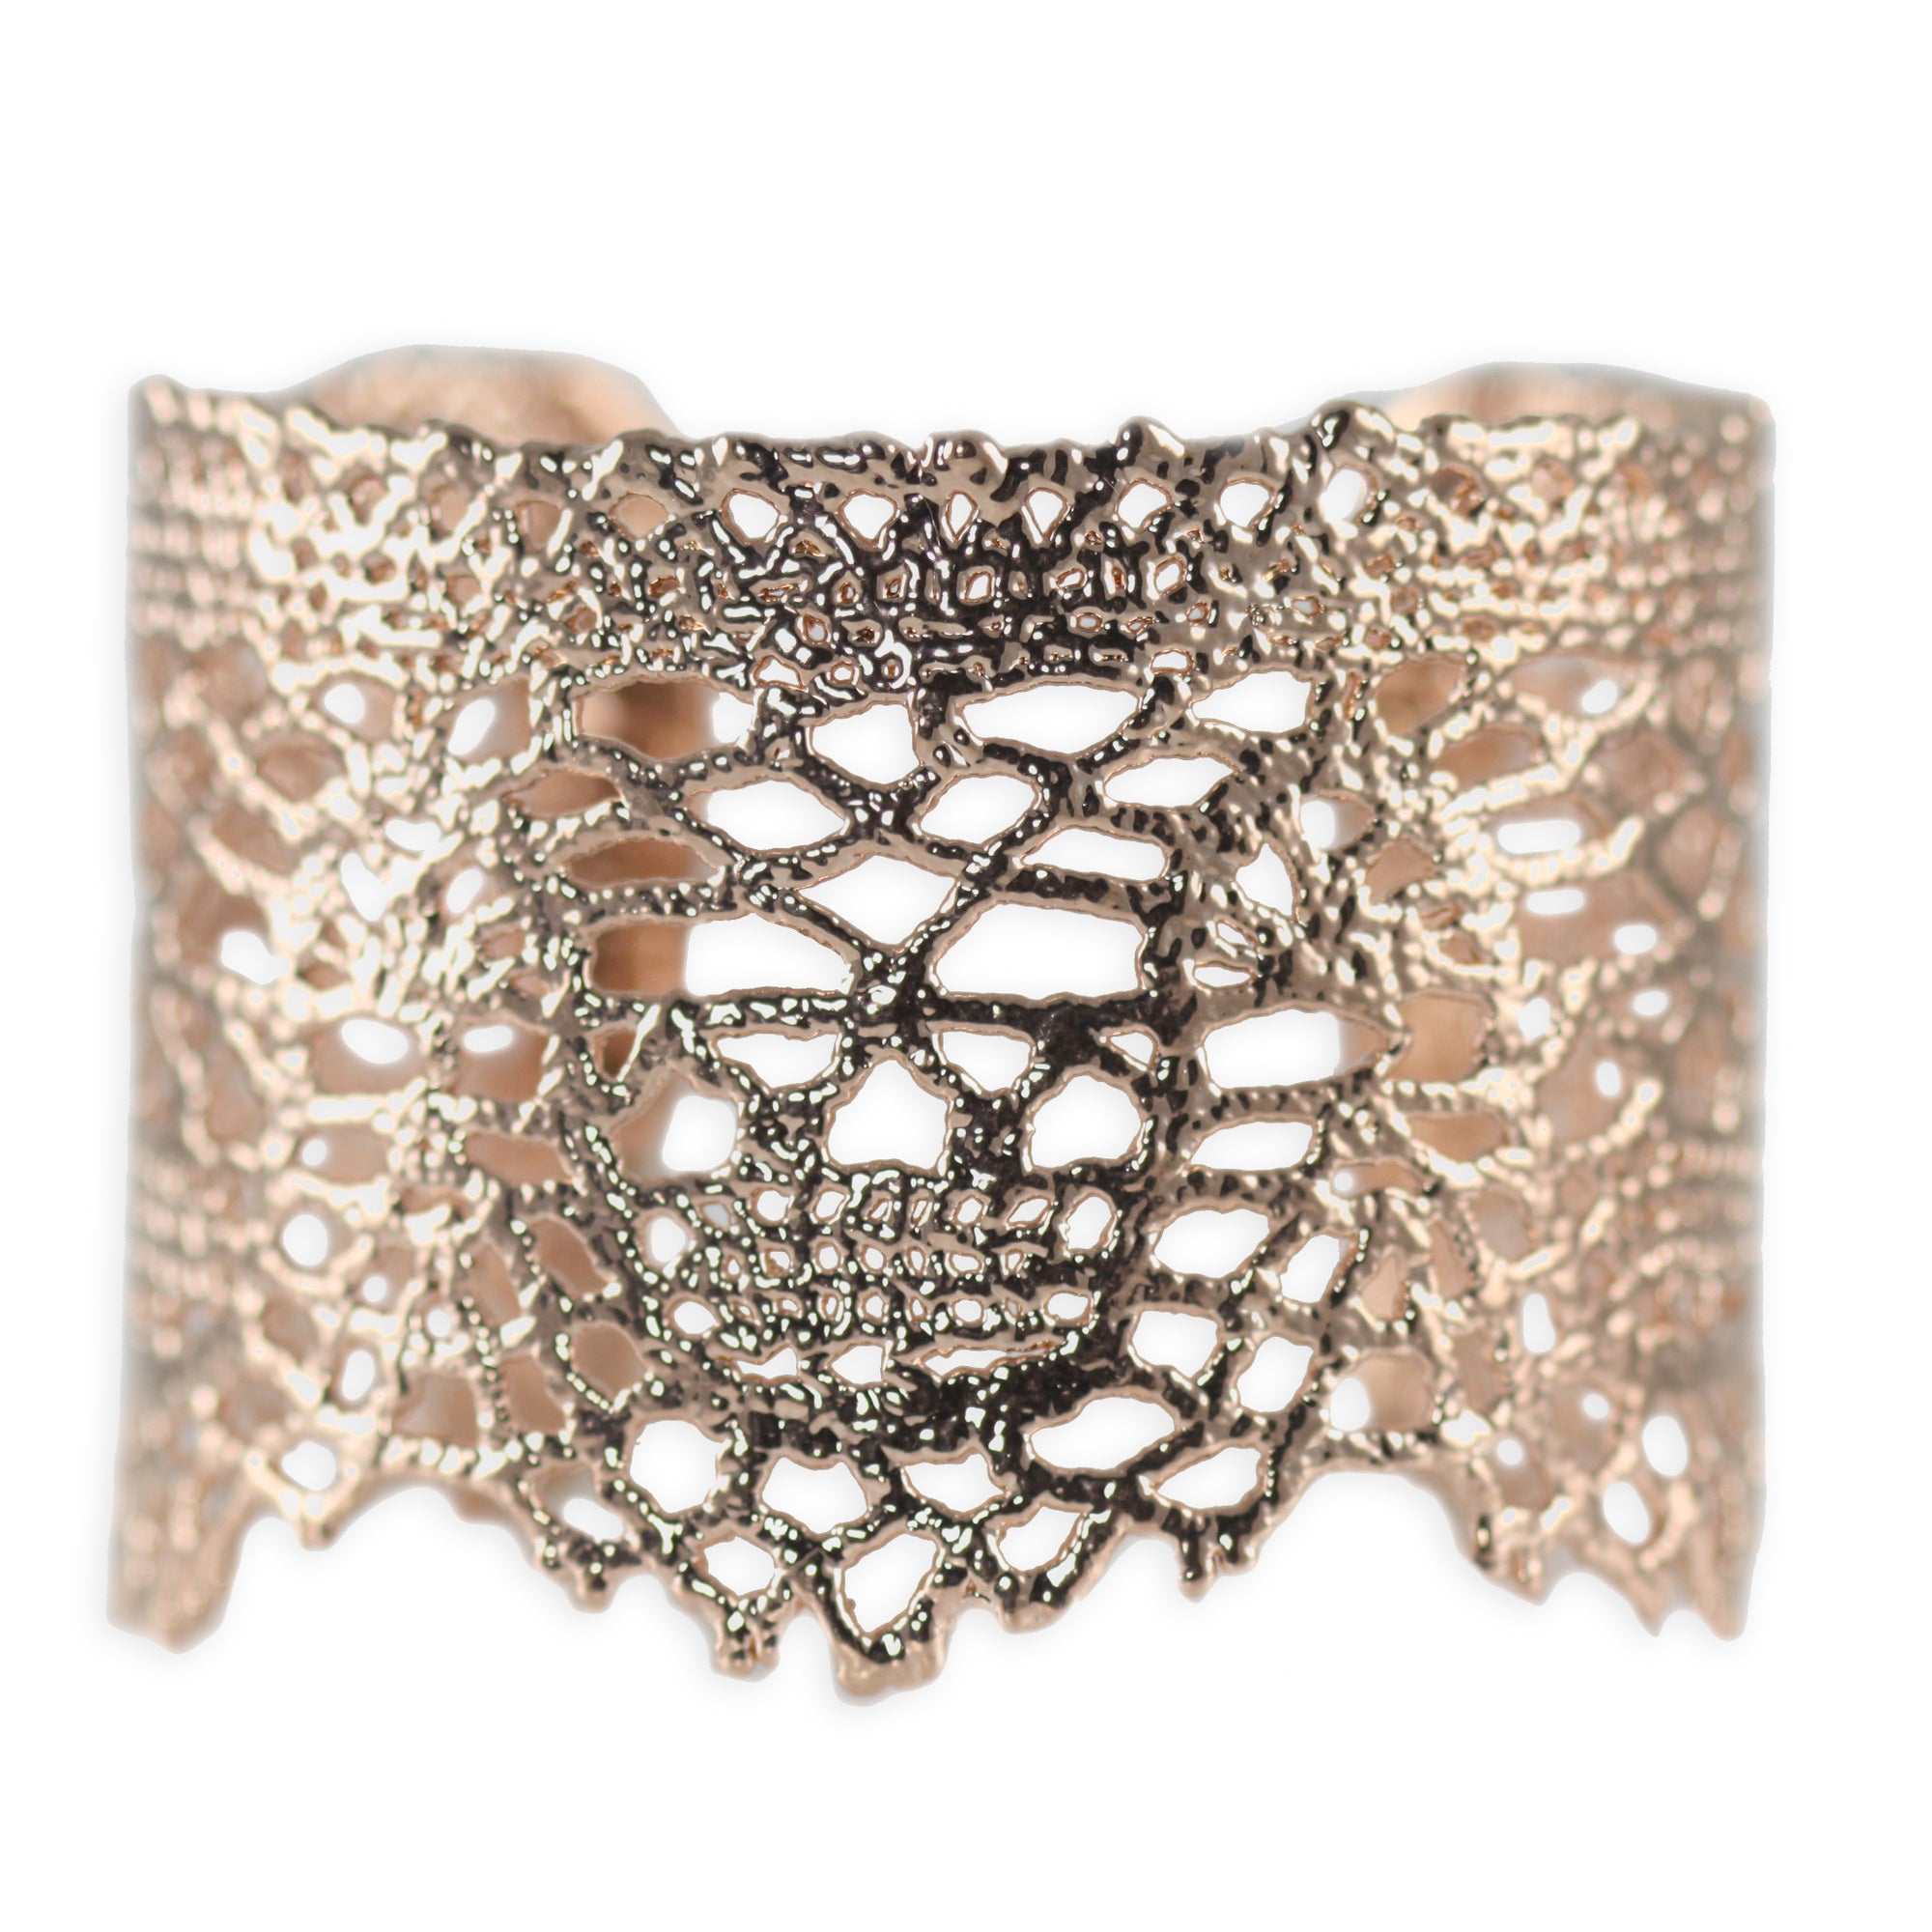 Intricate and exquisite lace cuff bracelet in sterling silver.